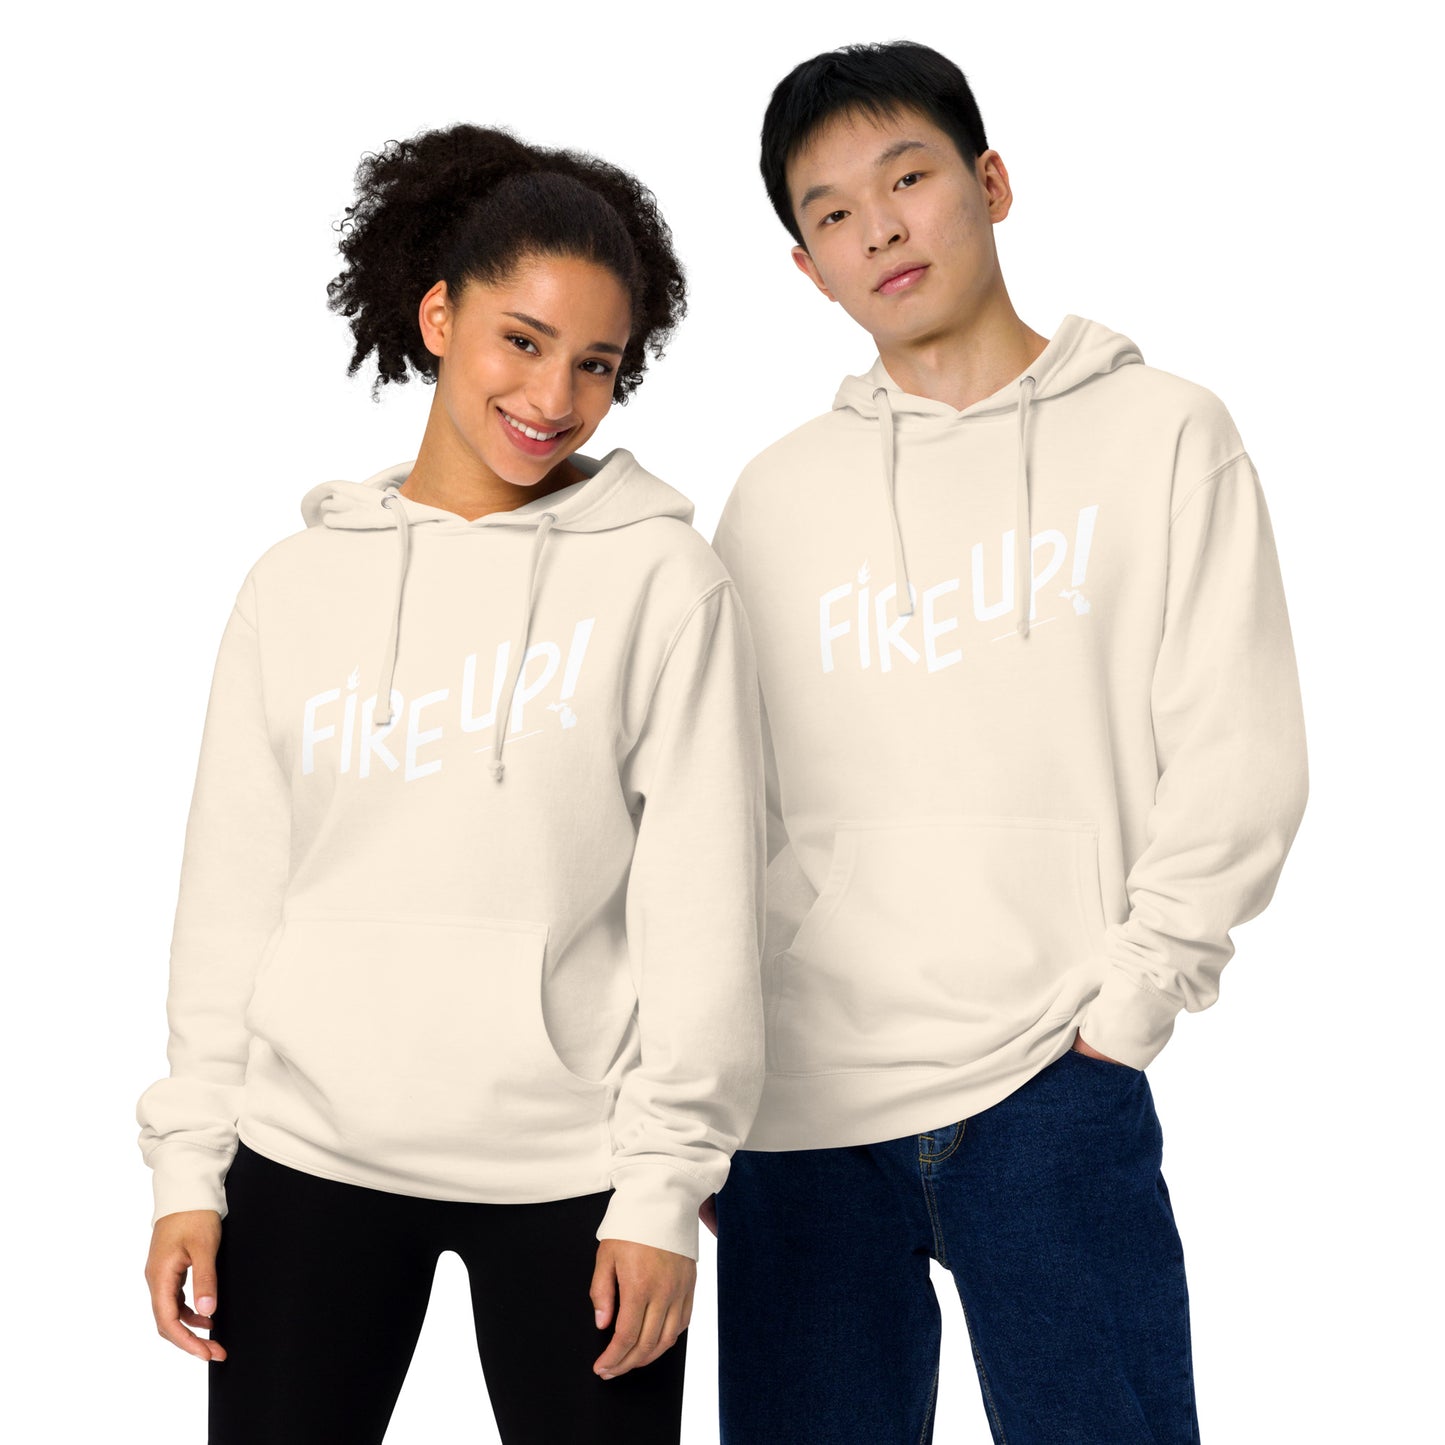 Fire Up! Unisex midweight hoodie